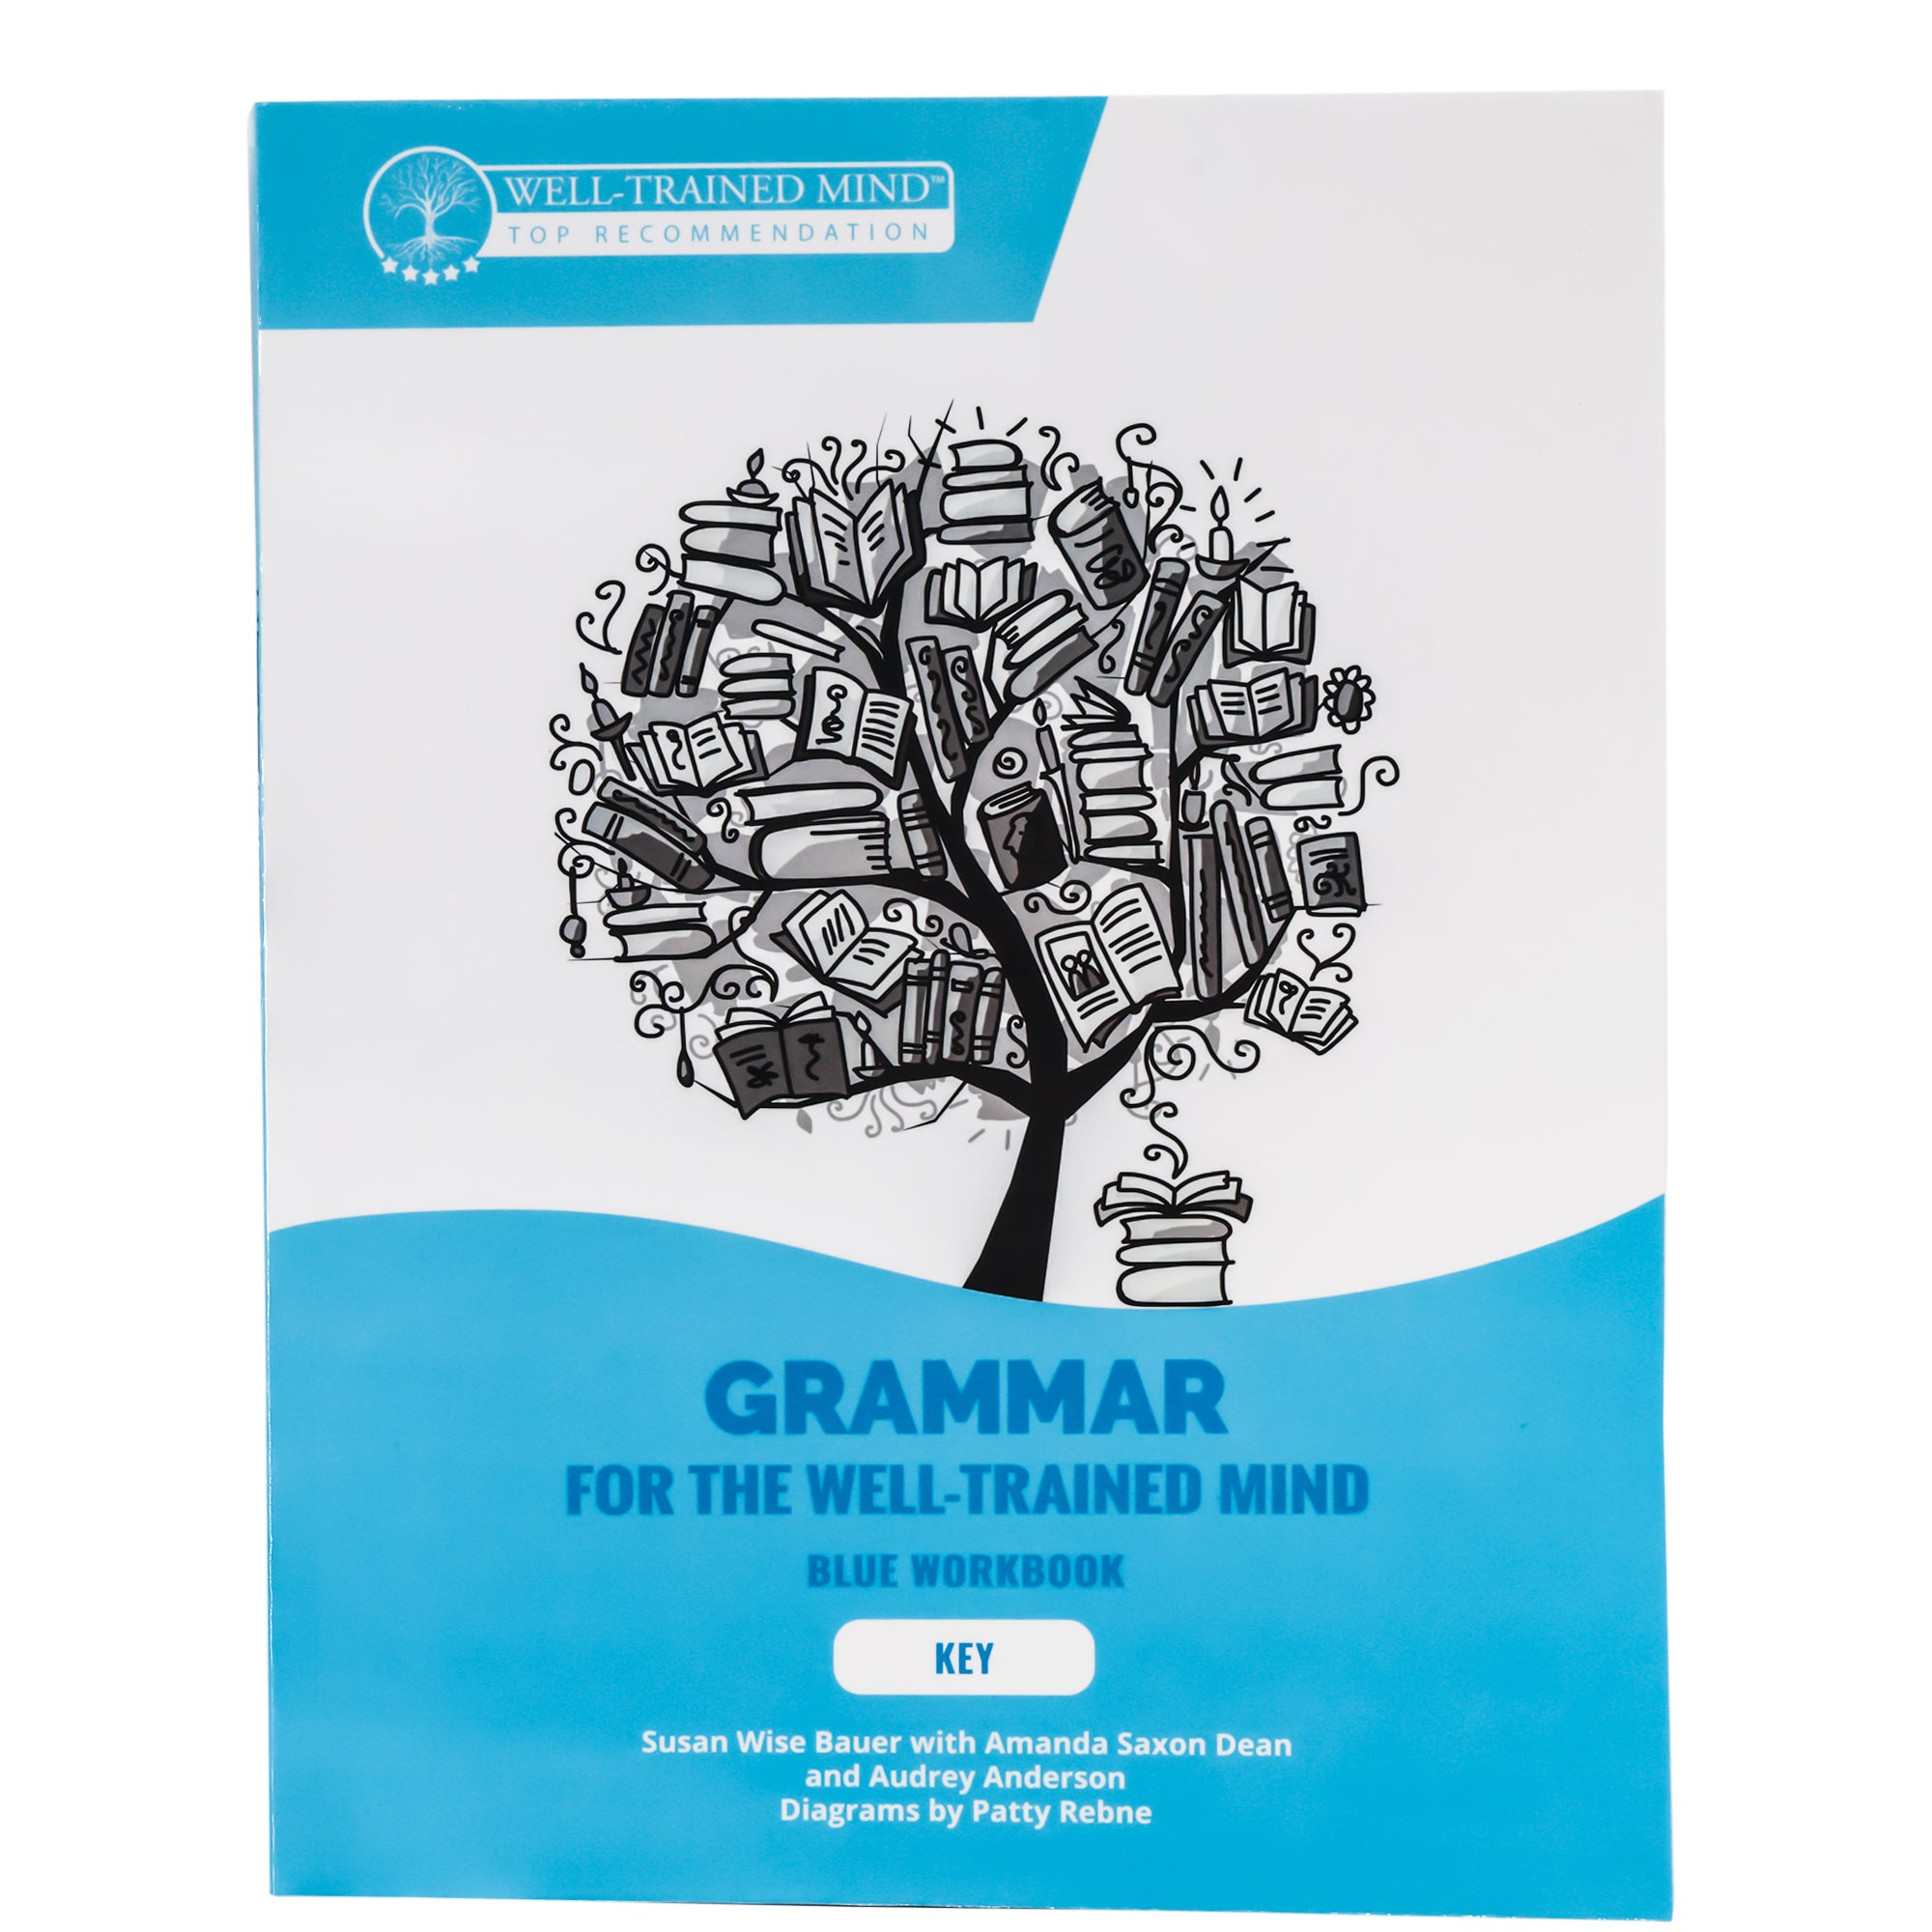 Grammar for the Well-Trained Mind light blue book cover. The cover has a white top and a blue bottom with a wave shape between the 2 colors. There is an illustration in the white section of a tree with books for leaves and a stack of books near the trunk. In the blue section at the bottom is blue text with the title and text reading “Blue Workbook” and “Key.”